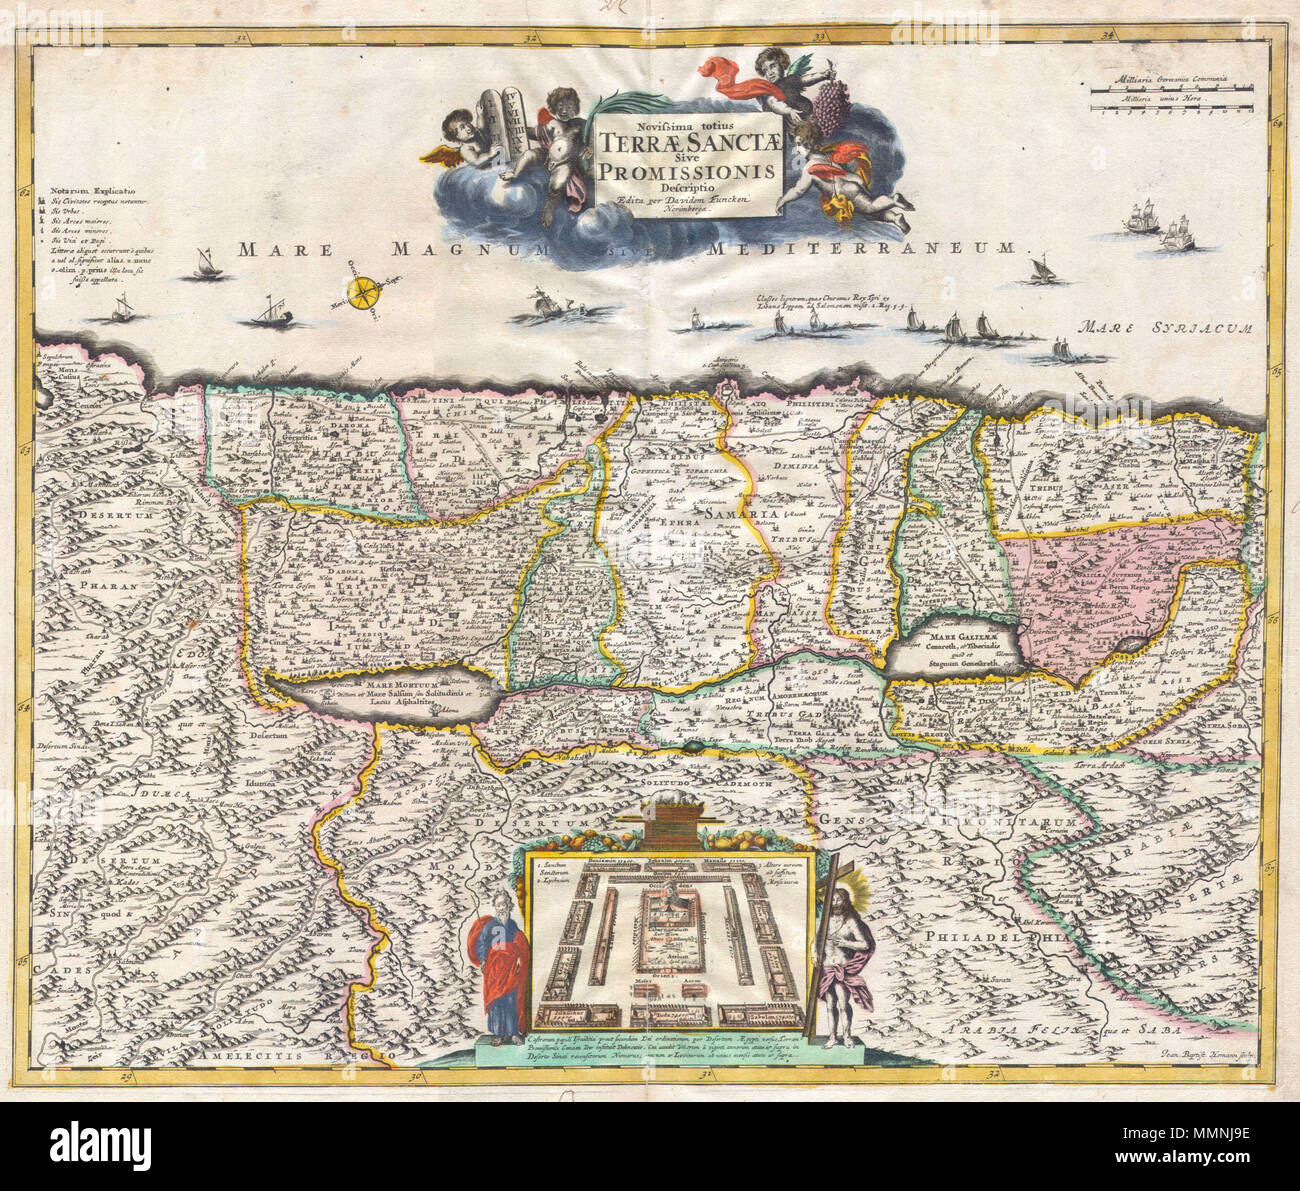 English: An altogether stunning map of the Israel, Palestine, or the Holy  Land. Issued in 1720 by David Funck of Nuremburg and geographically based  upon Visscher's Map of 1659 and De